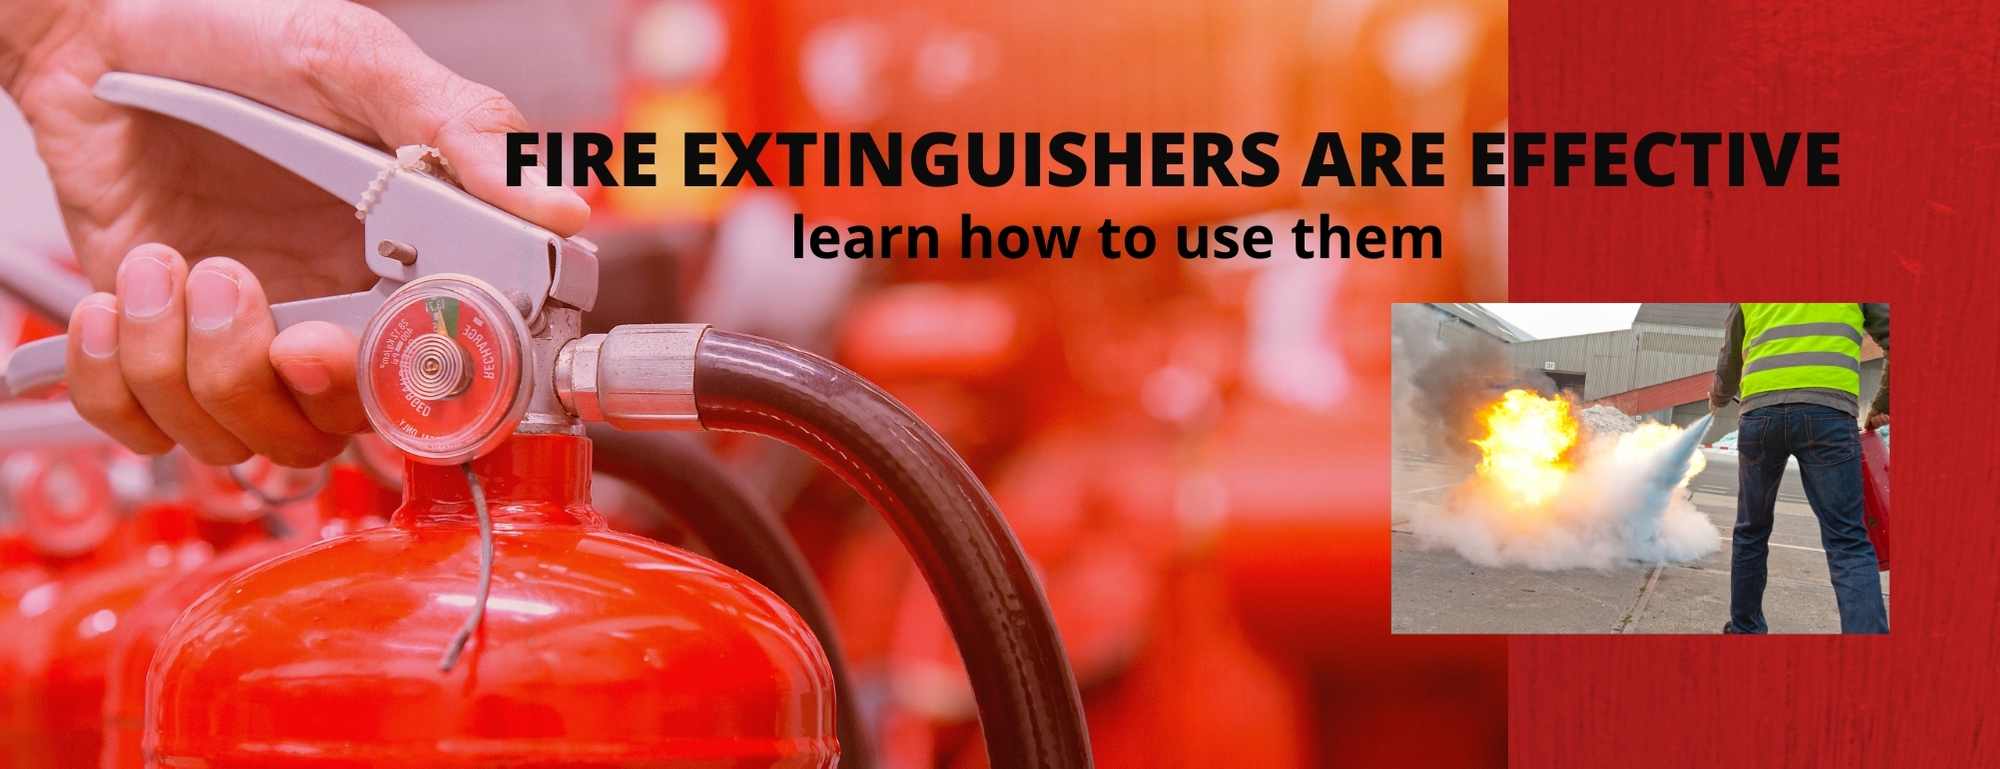 How to use a fire extinguisher safely and effectively